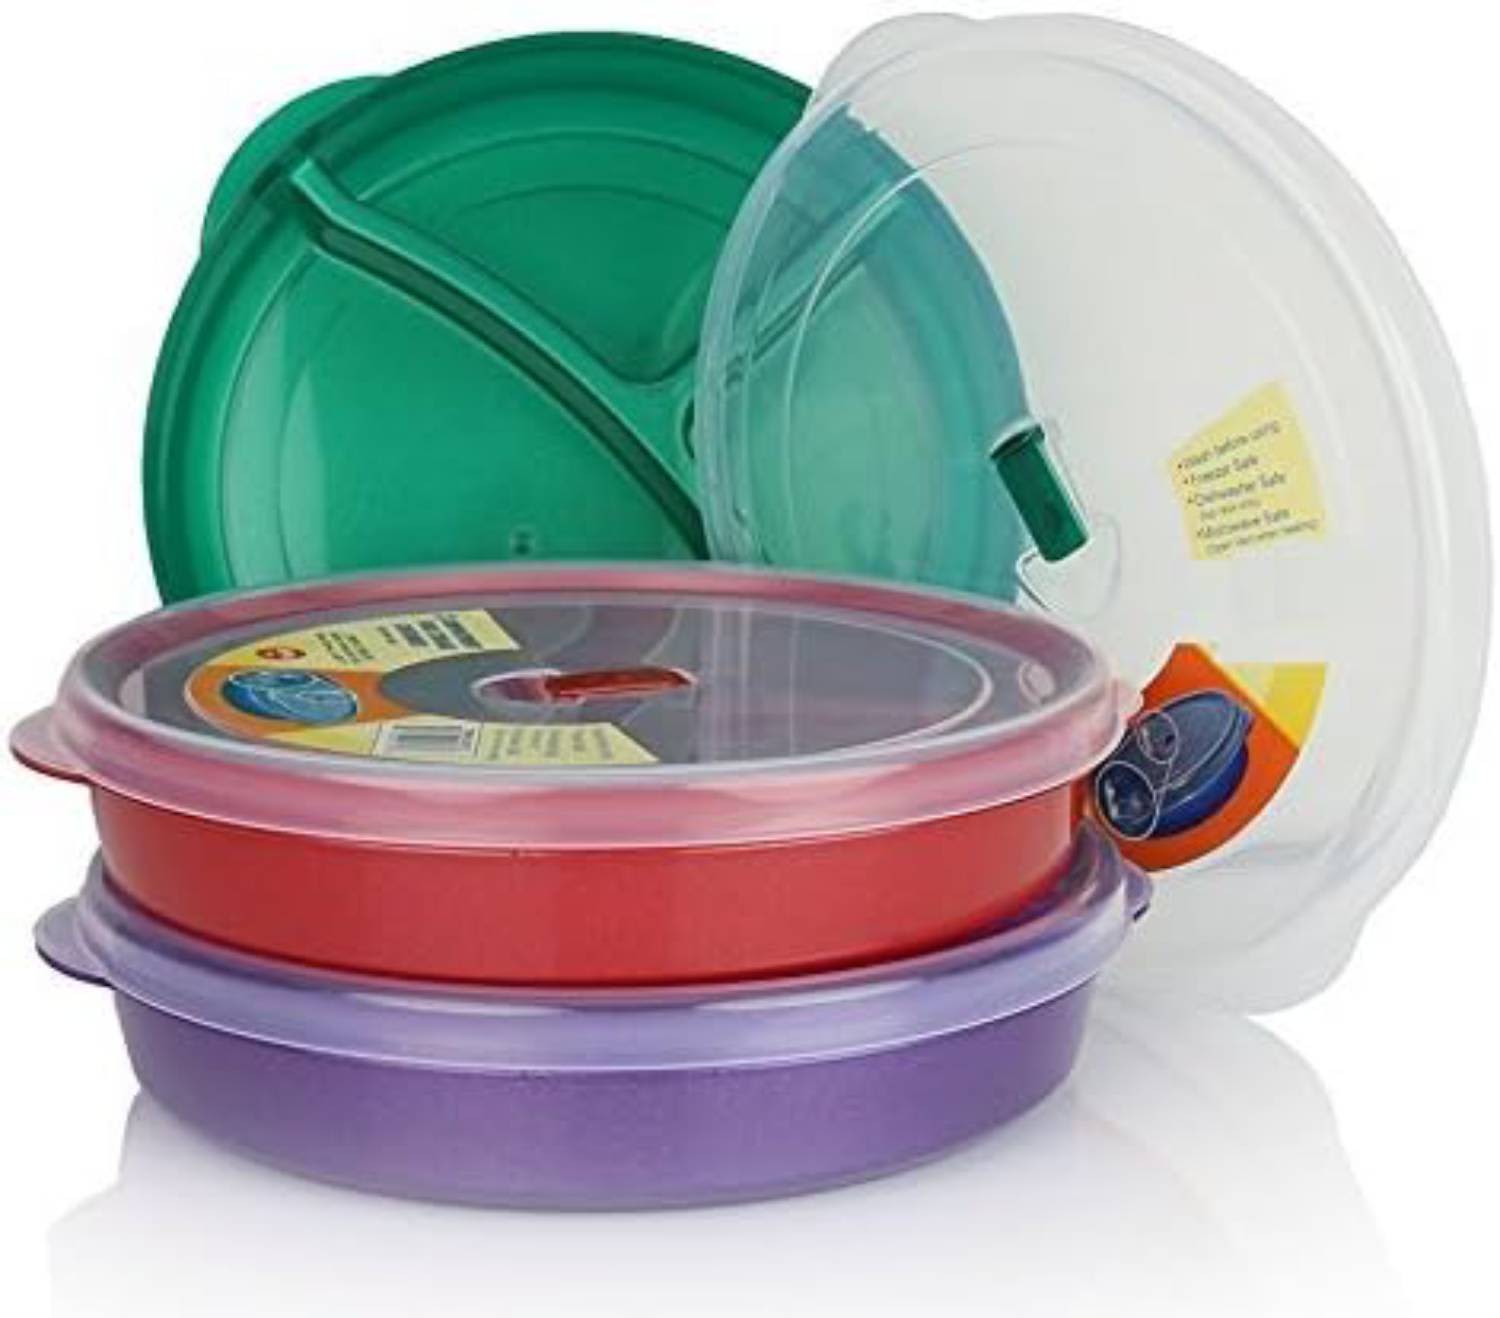 https://cdn.apartmenttherapy.info/image/upload/v1700151742/gen-workflow/product-database/chefs-first-choice-food-storage-tray-containers.jpg